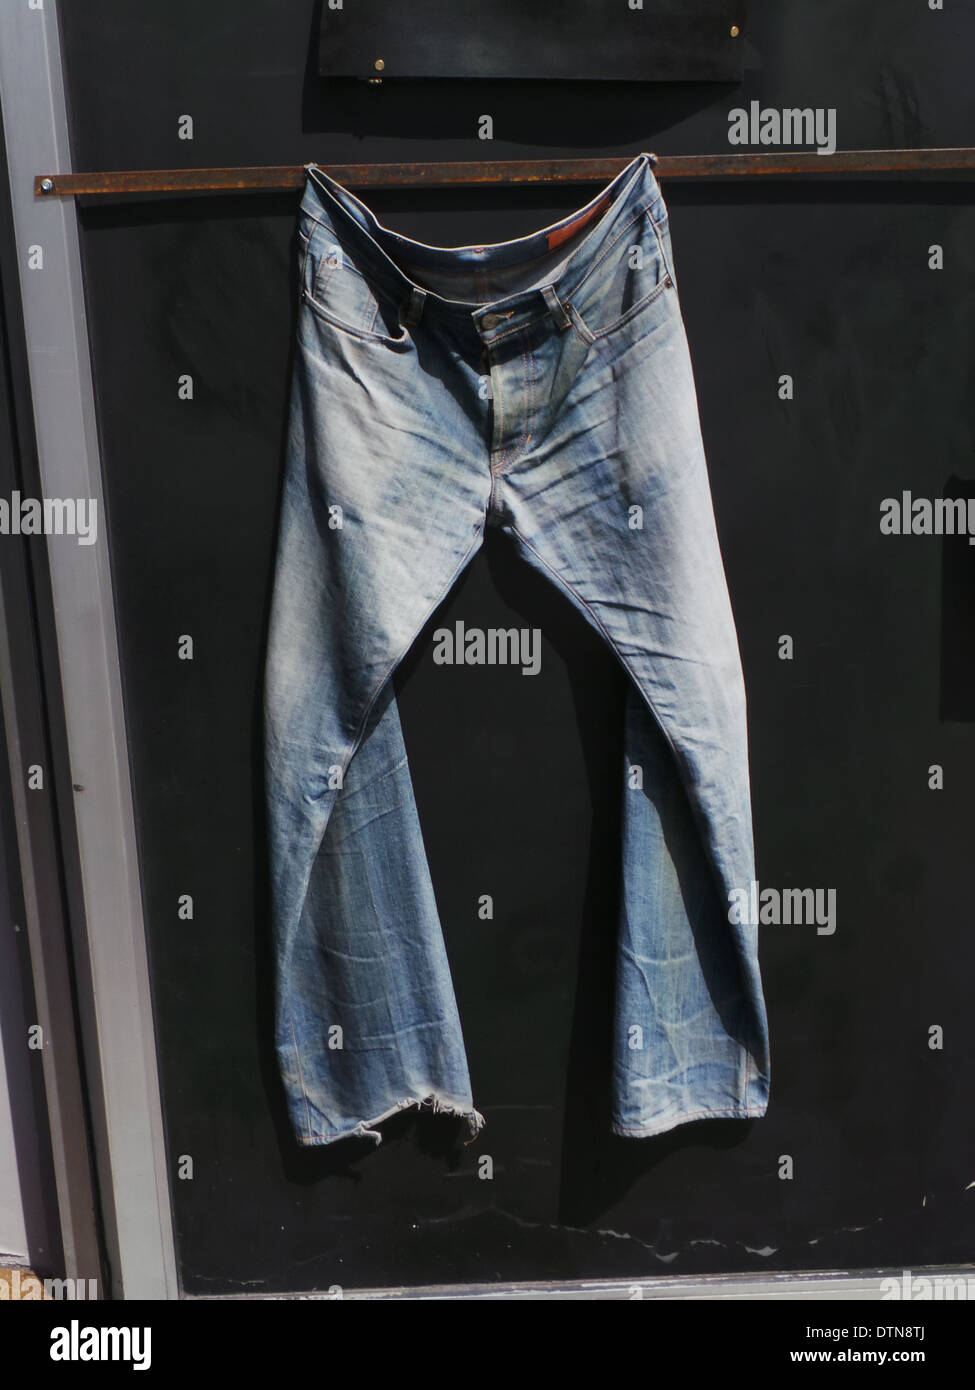 Hanging jeans Stock Photo